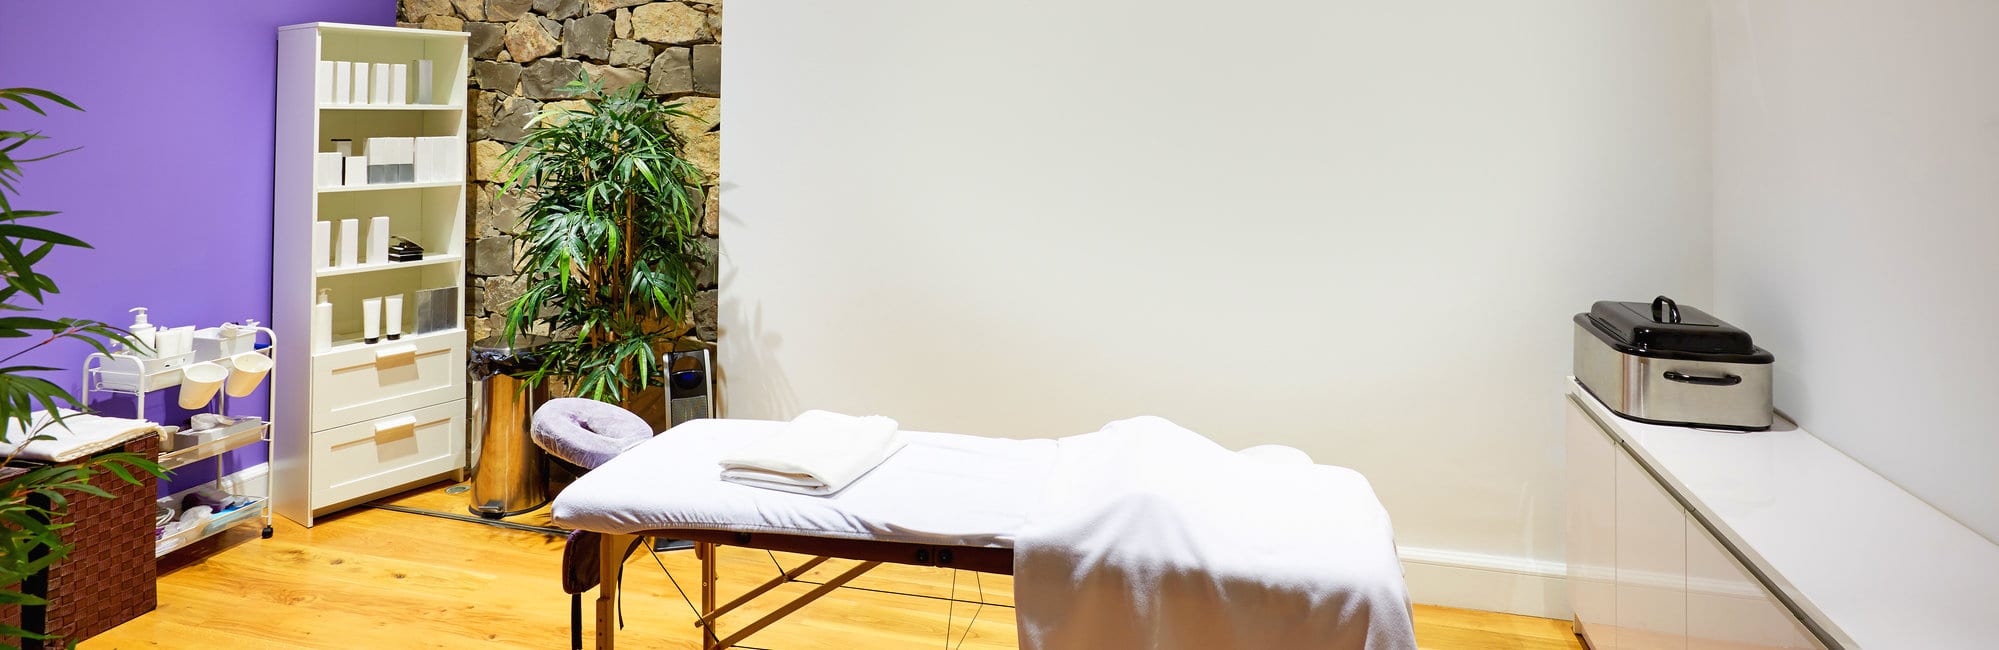 Massage room with massage table and products with stone wall